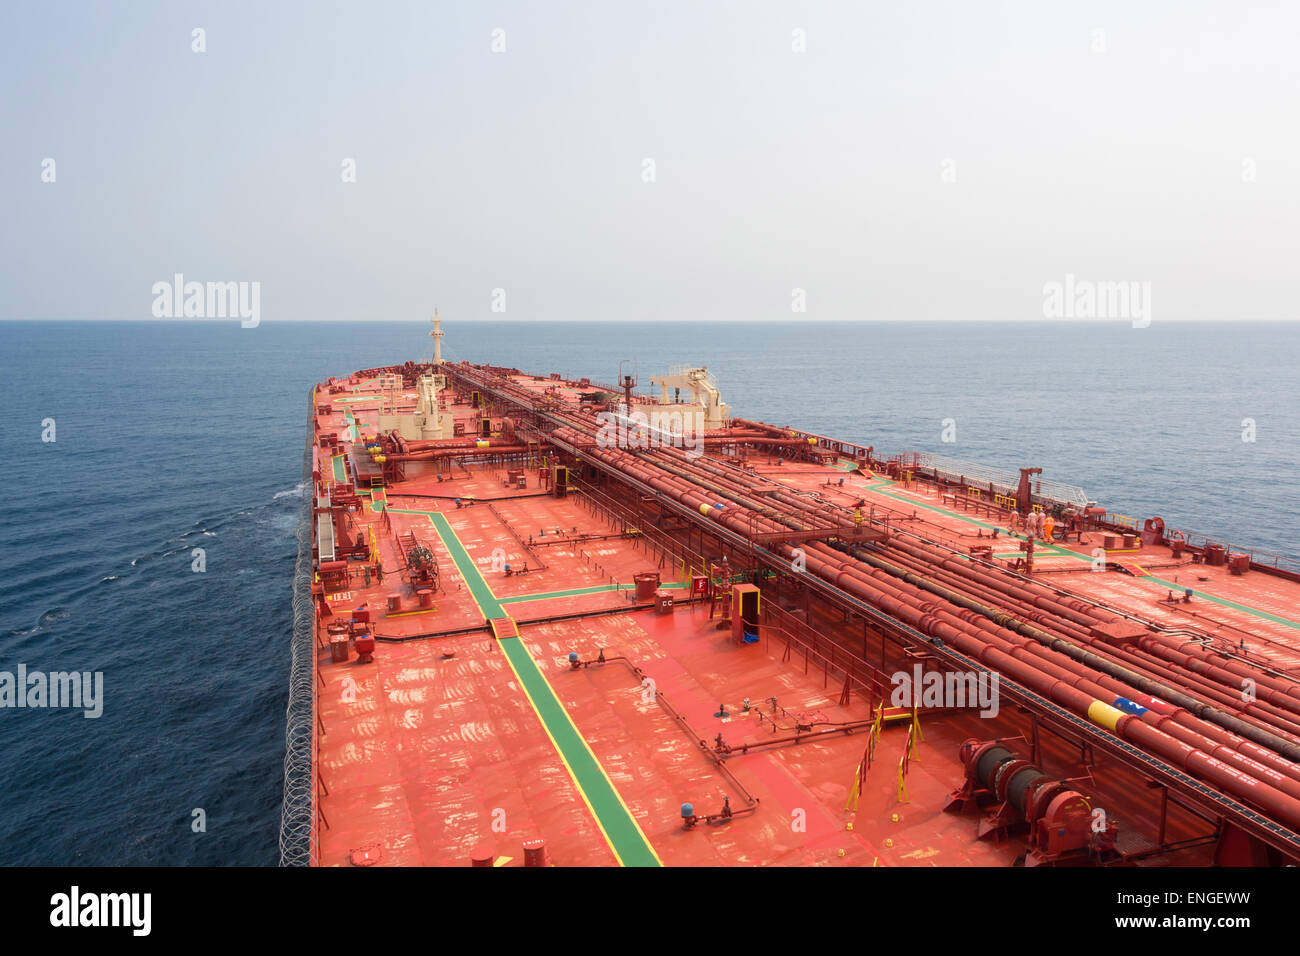 Diagonal deck of crude oil carrier Stock Photo